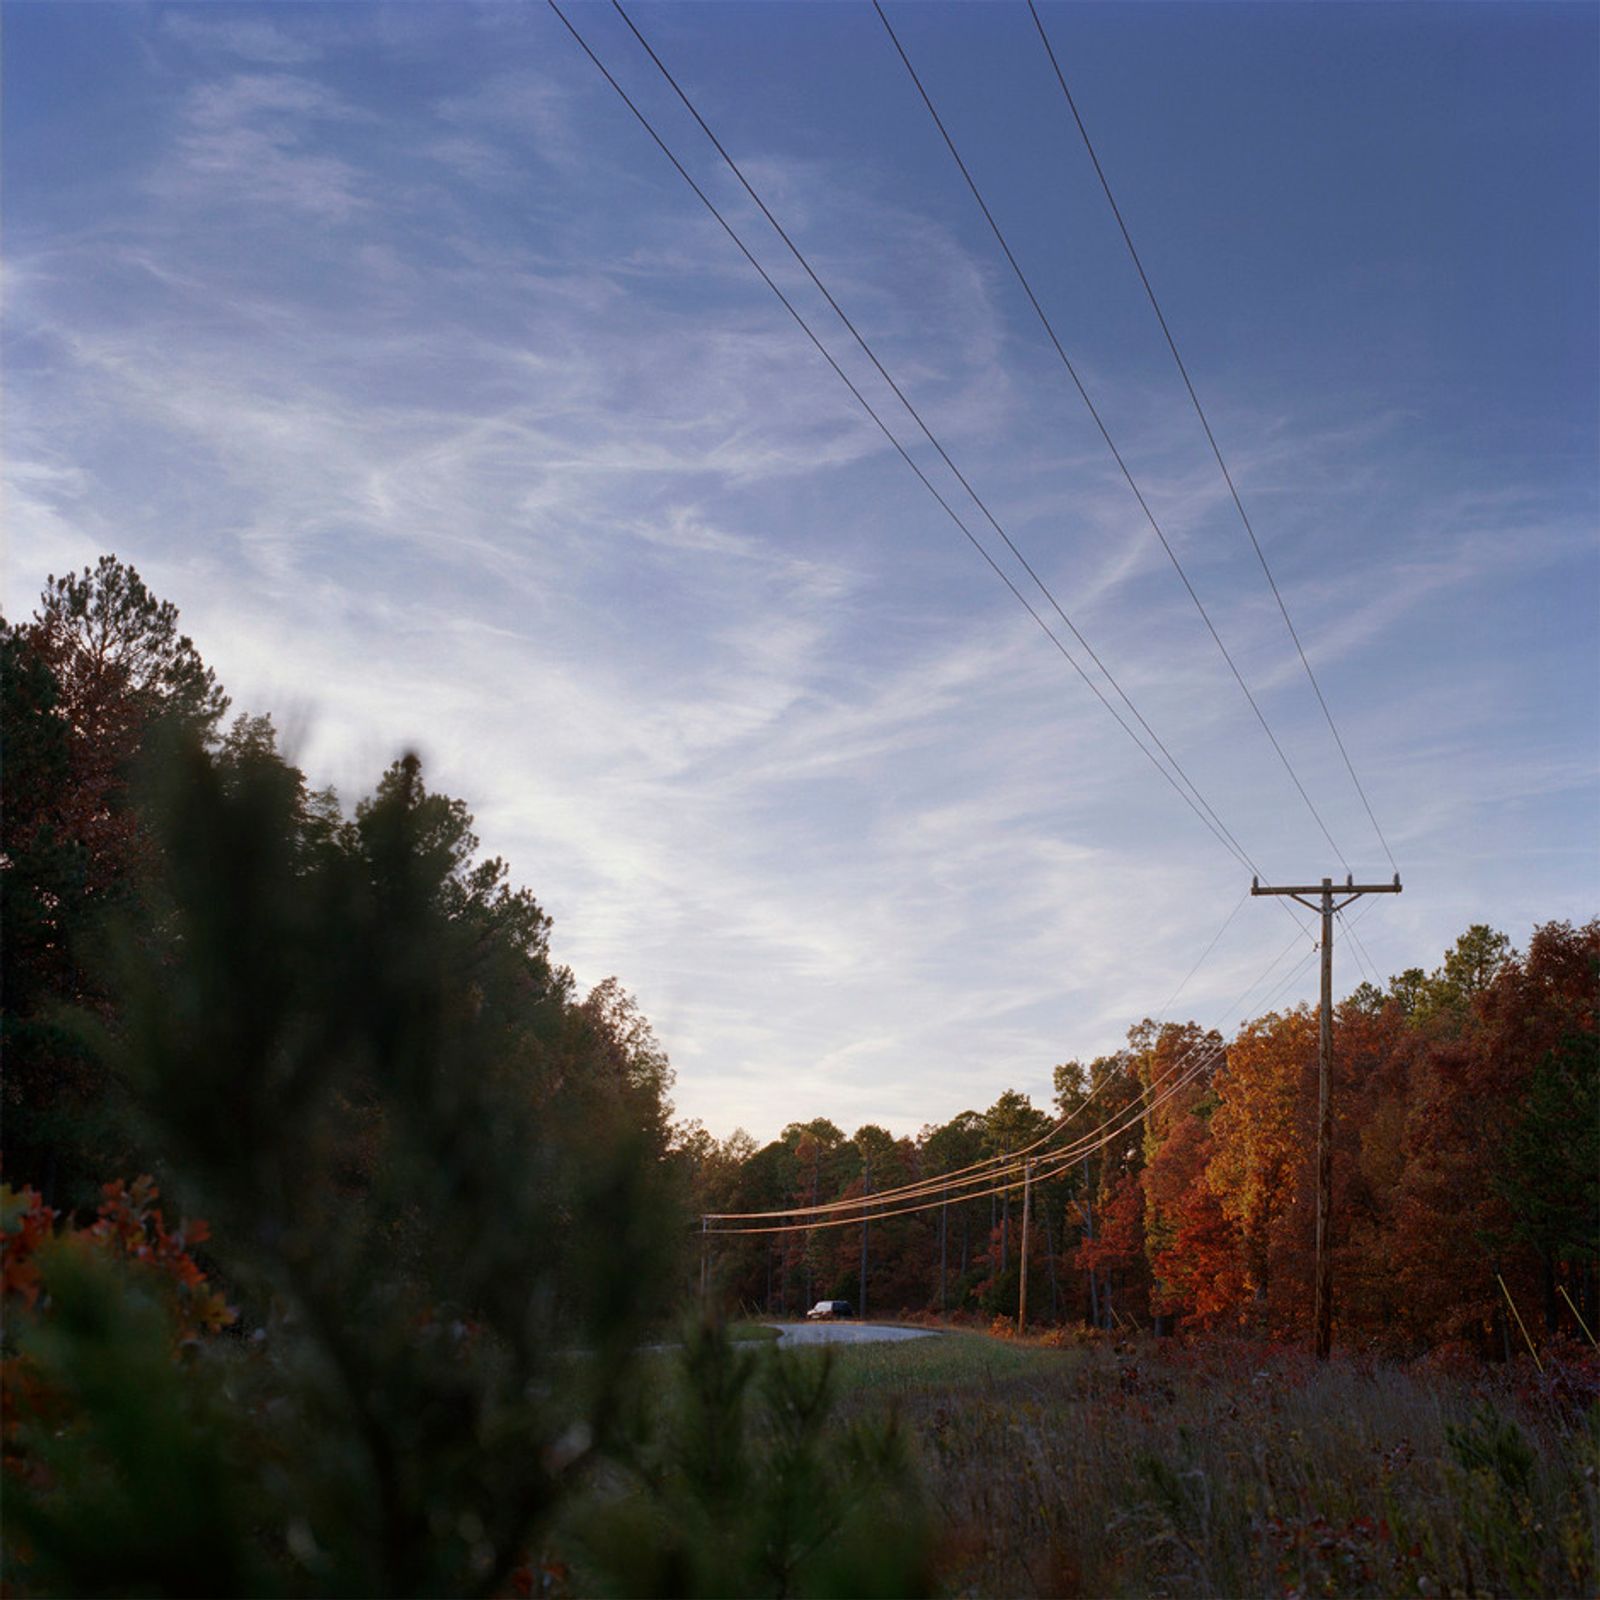 © Benjamin Hoste - Image from the Plato, Mo. - The Small Town at the United States photography project